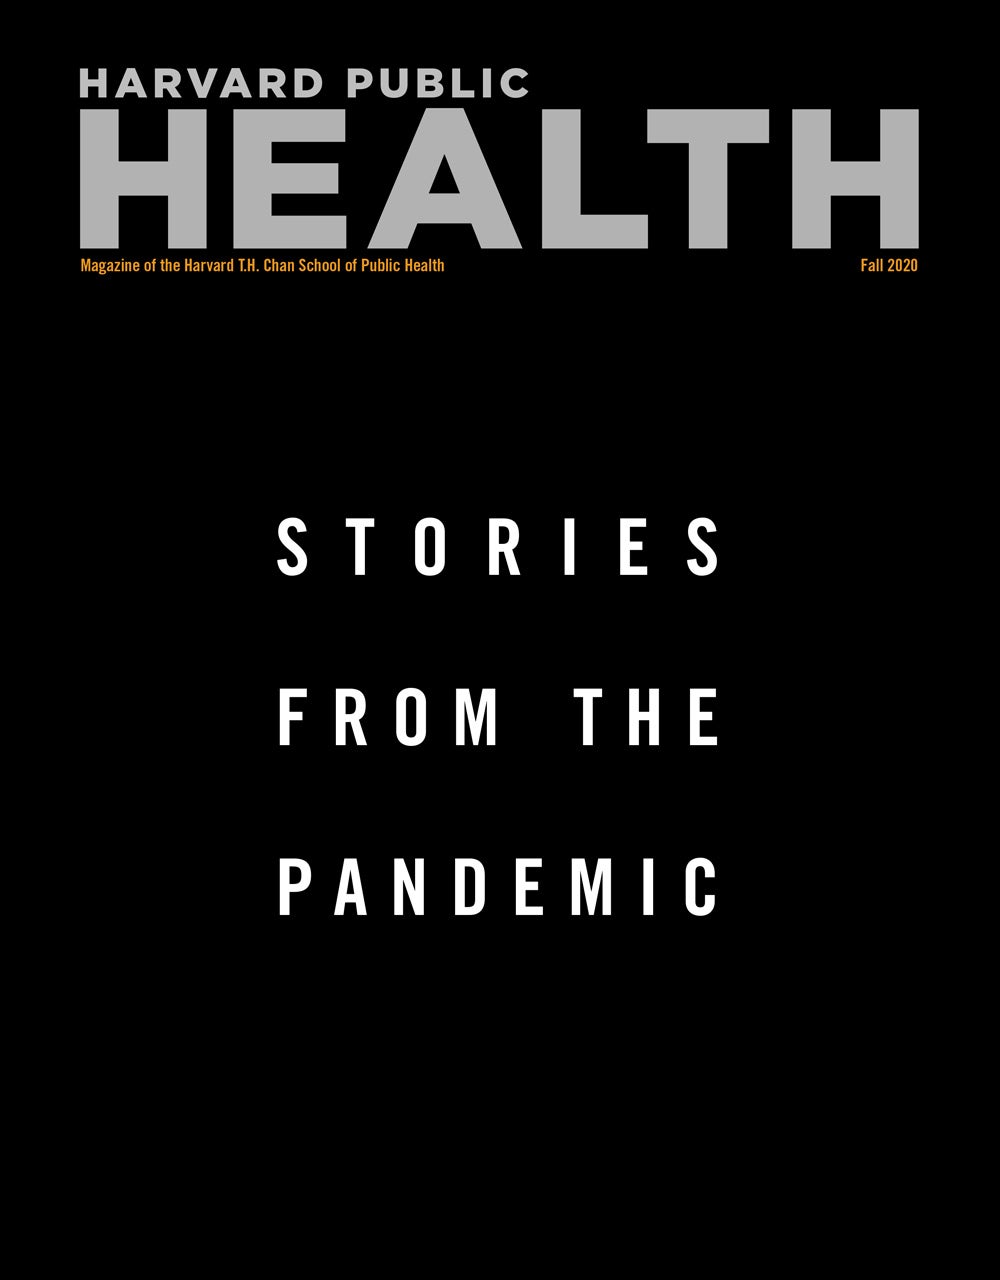 Cover for Fall 2020, reads "Stories from the Pandemic"